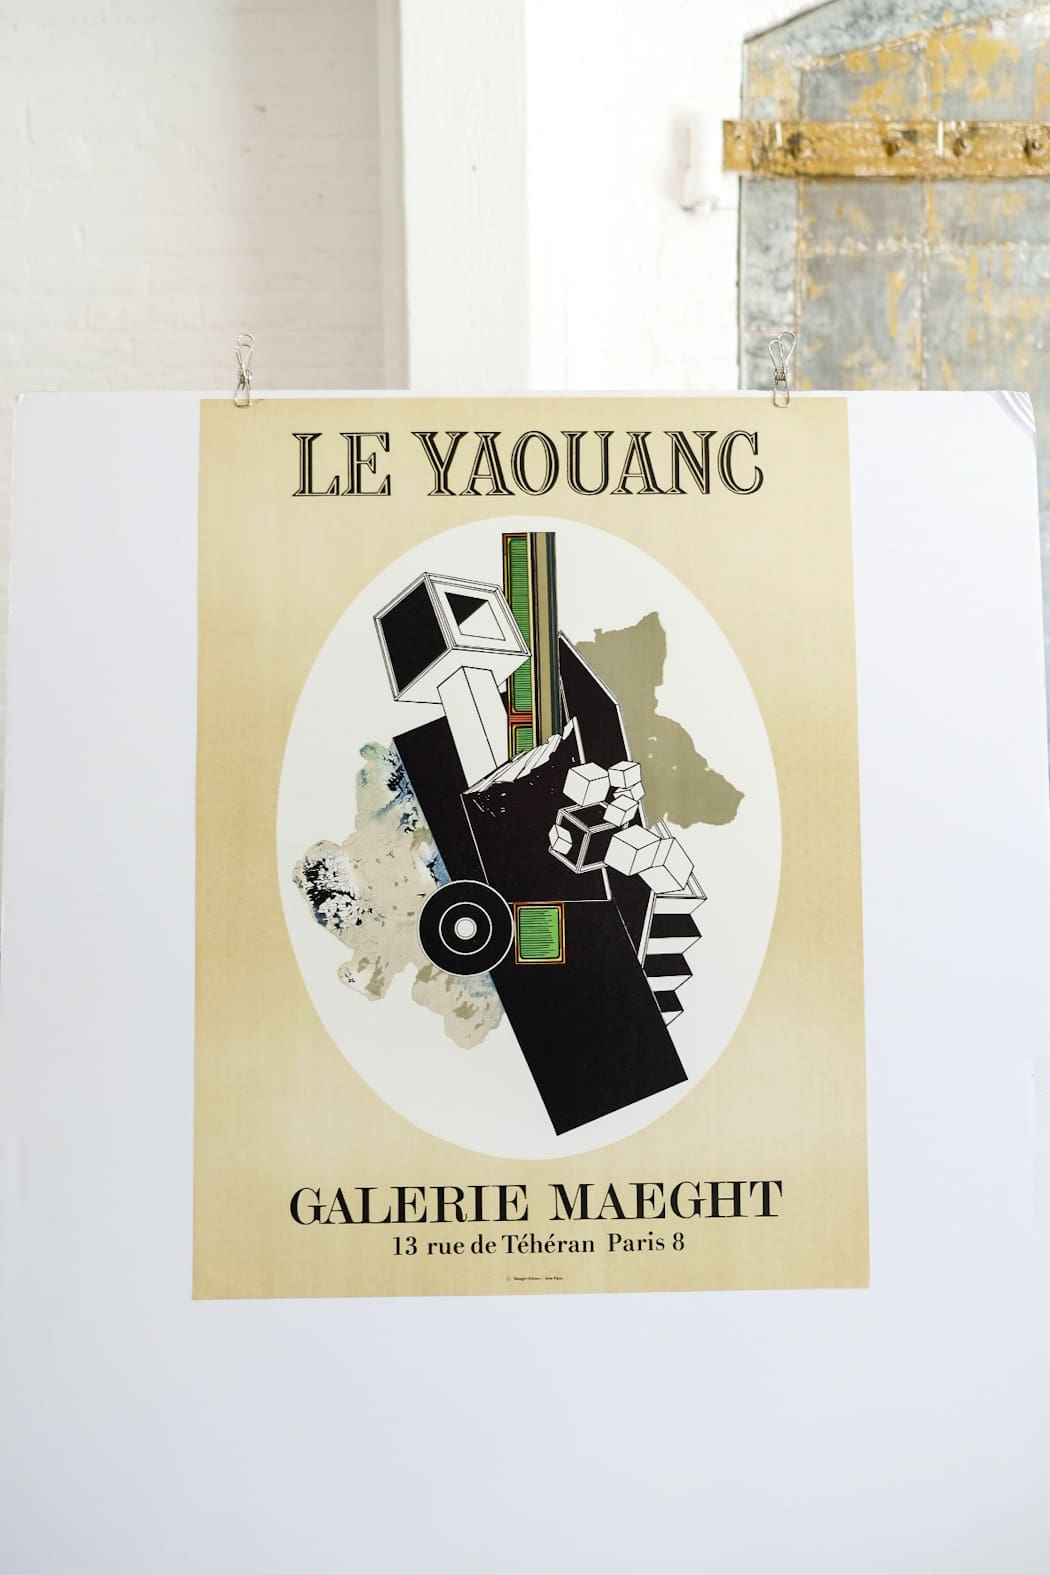 Alain Le Yaouang Galerie Maeght Lithograph Poster